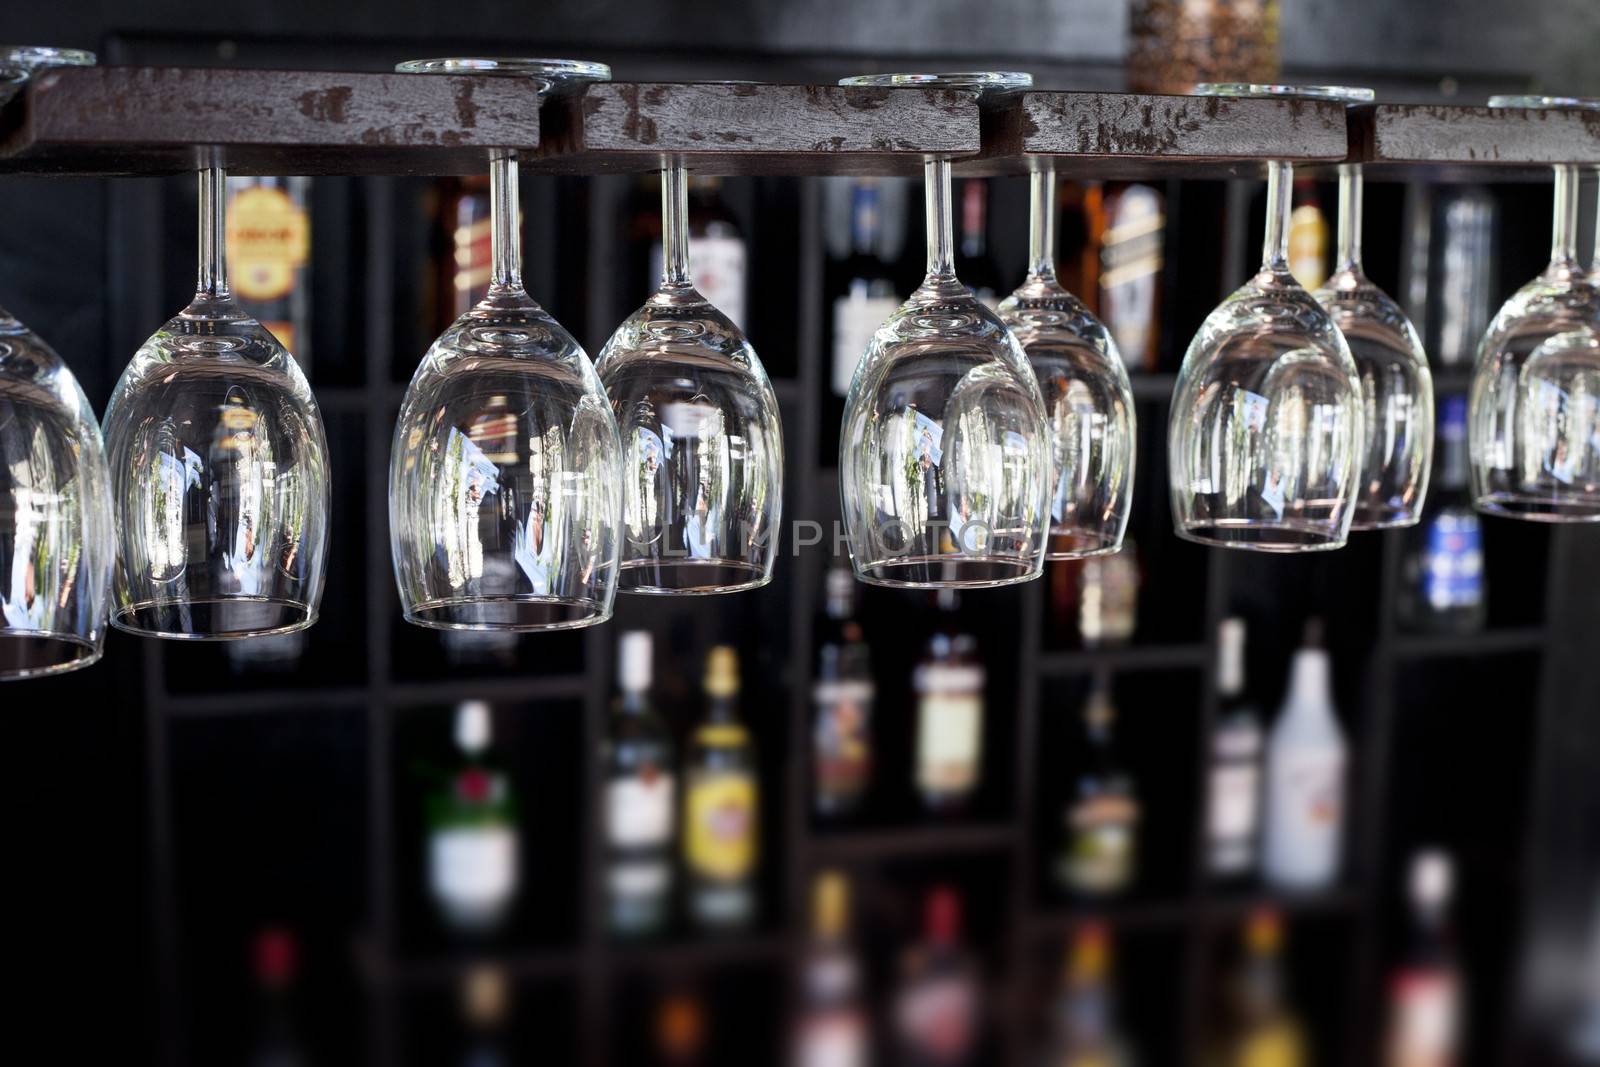 Wine glasses hanging upside down in a bar with bottles blurred in the background